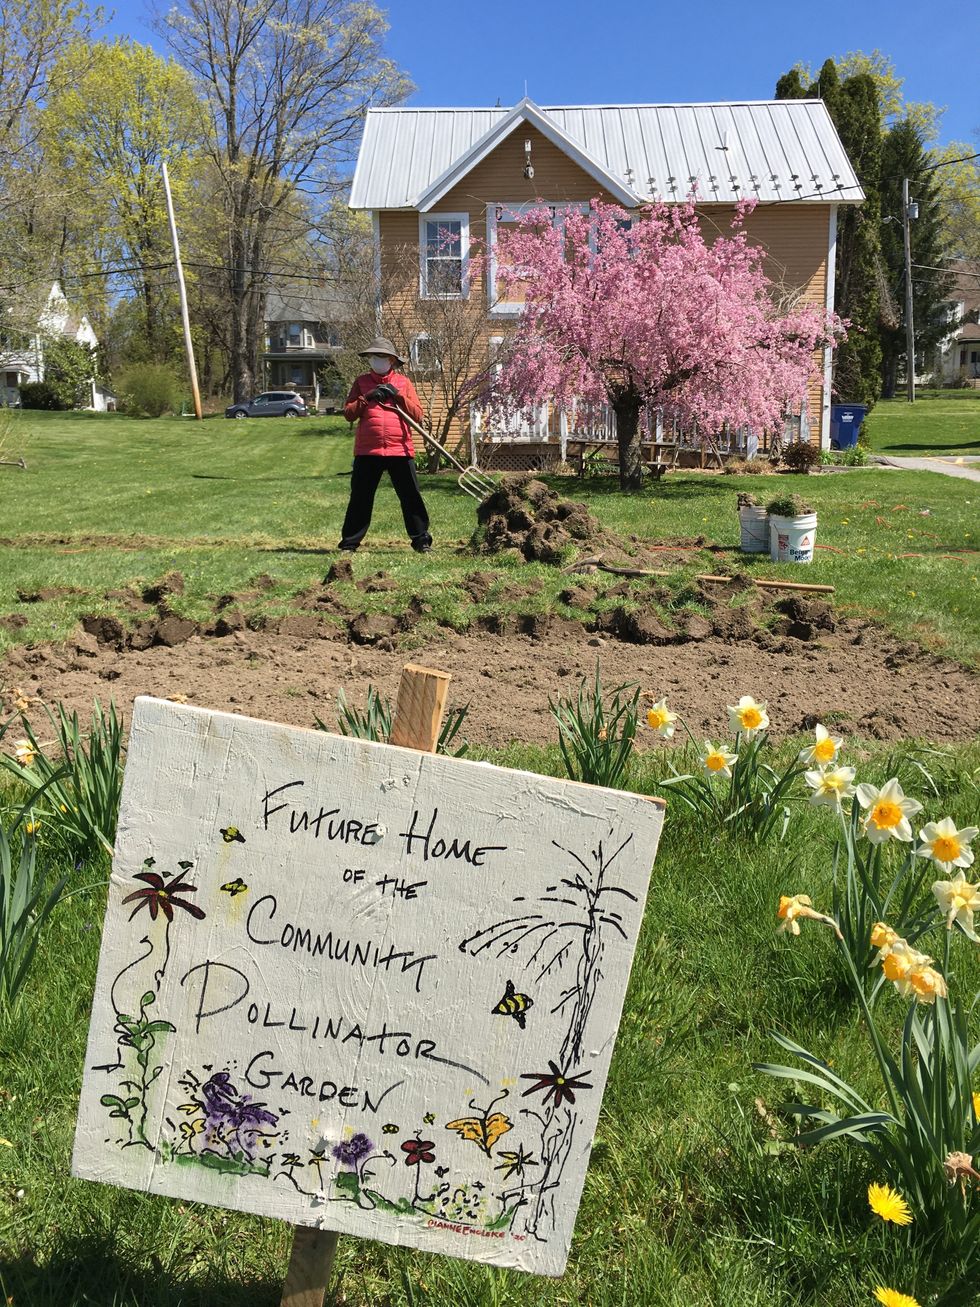 Pollinator garden to provide safe space for the birds, the bees and the butterflies